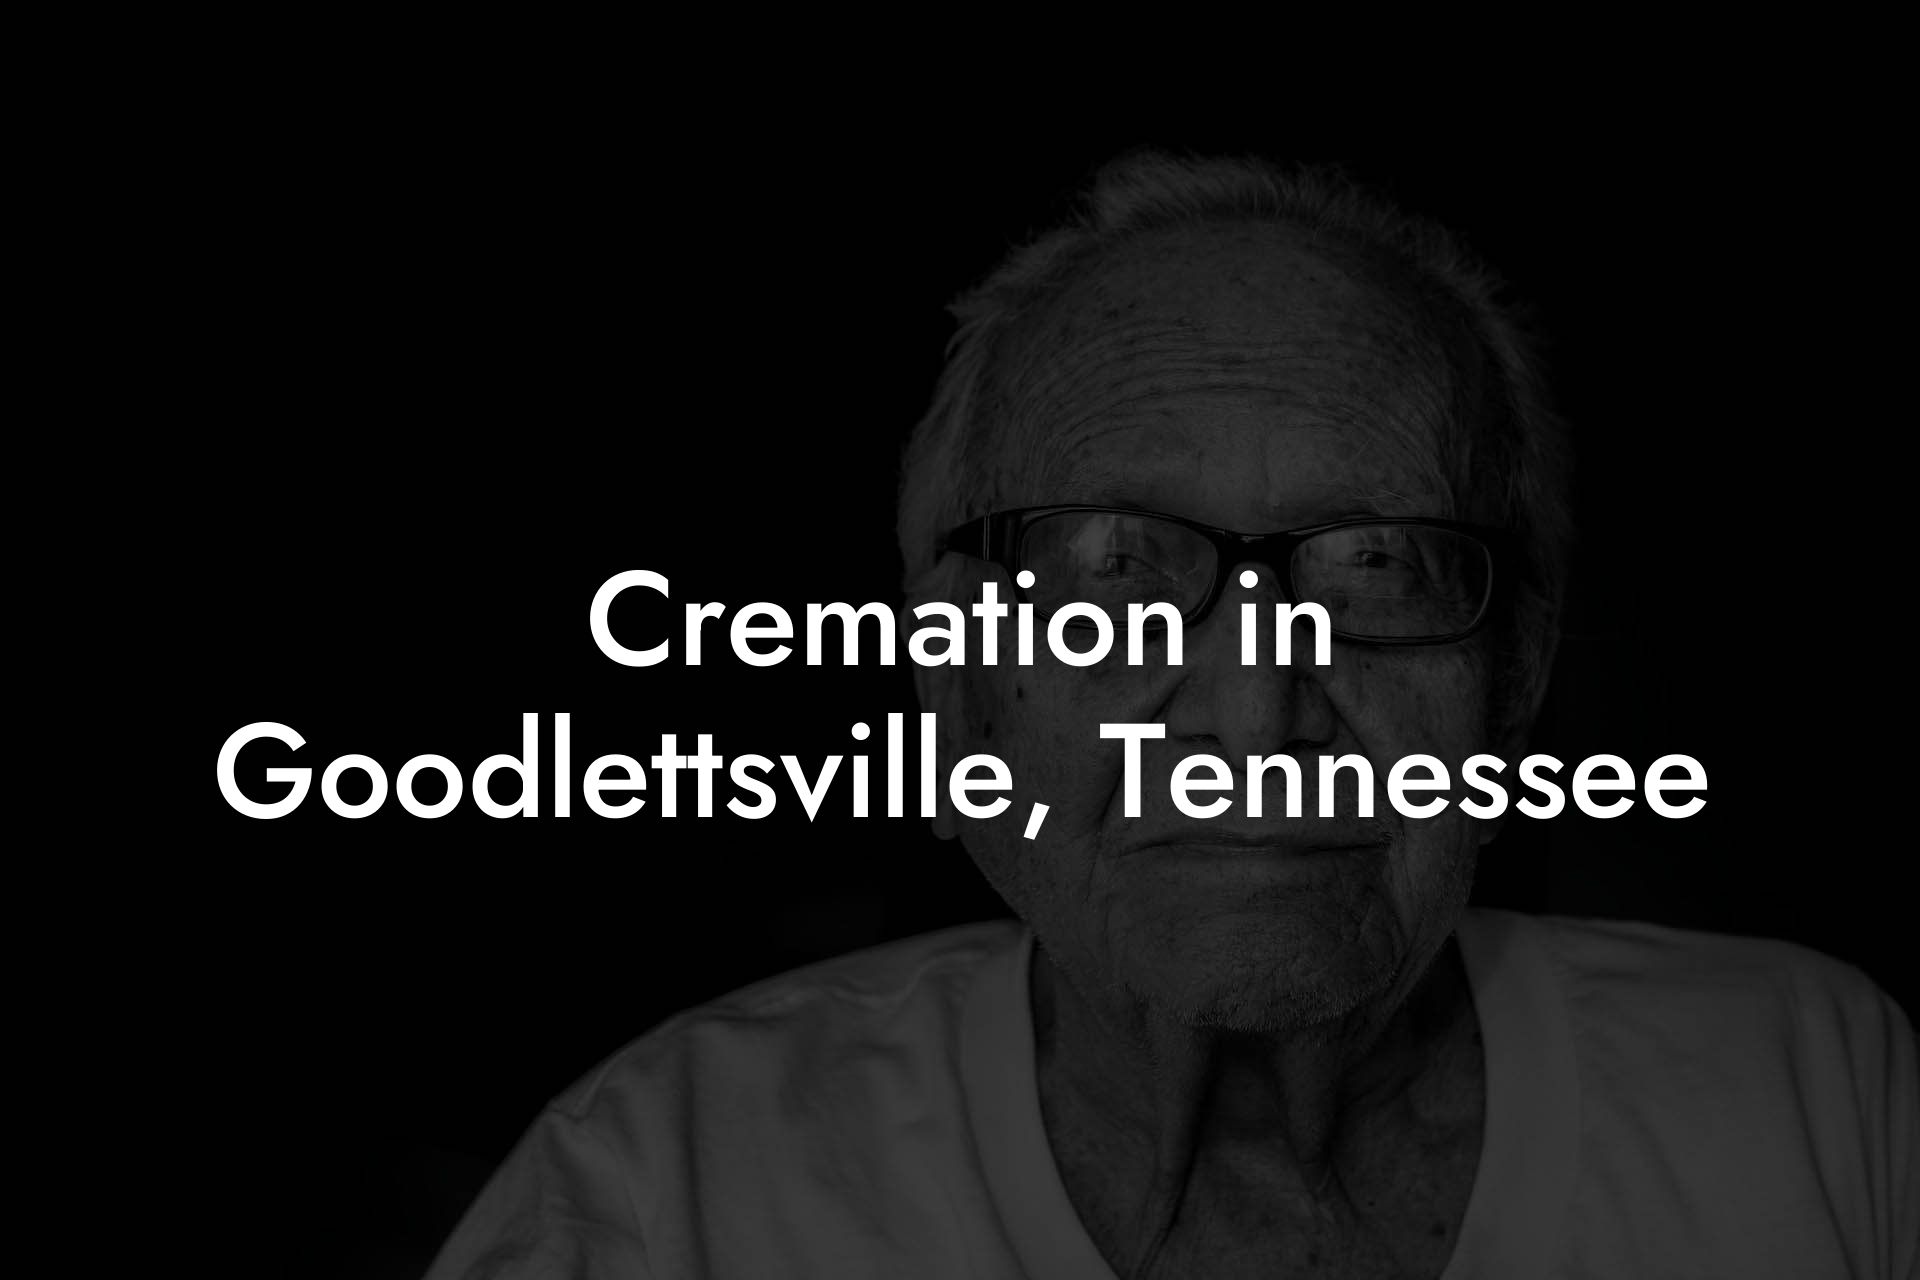 Cremation in Goodlettsville, Tennessee